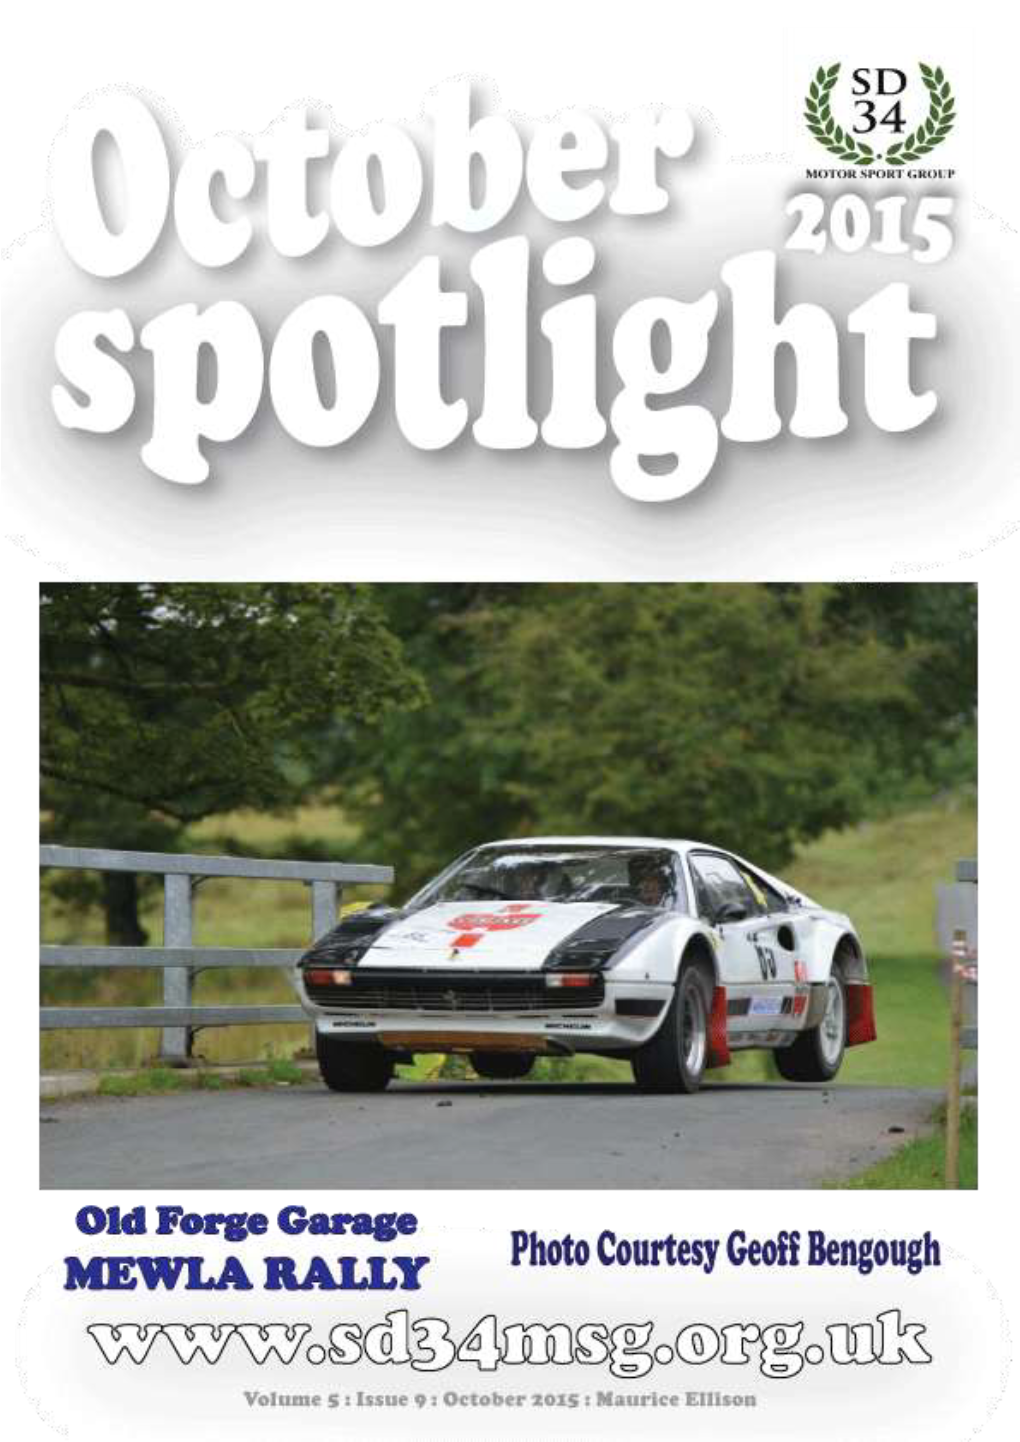 Clitheronian Rally 2015 – Sat-Sun September 26-27 Several Preston Motorsport Club Members Took Part in the Clitheronian Road Rally